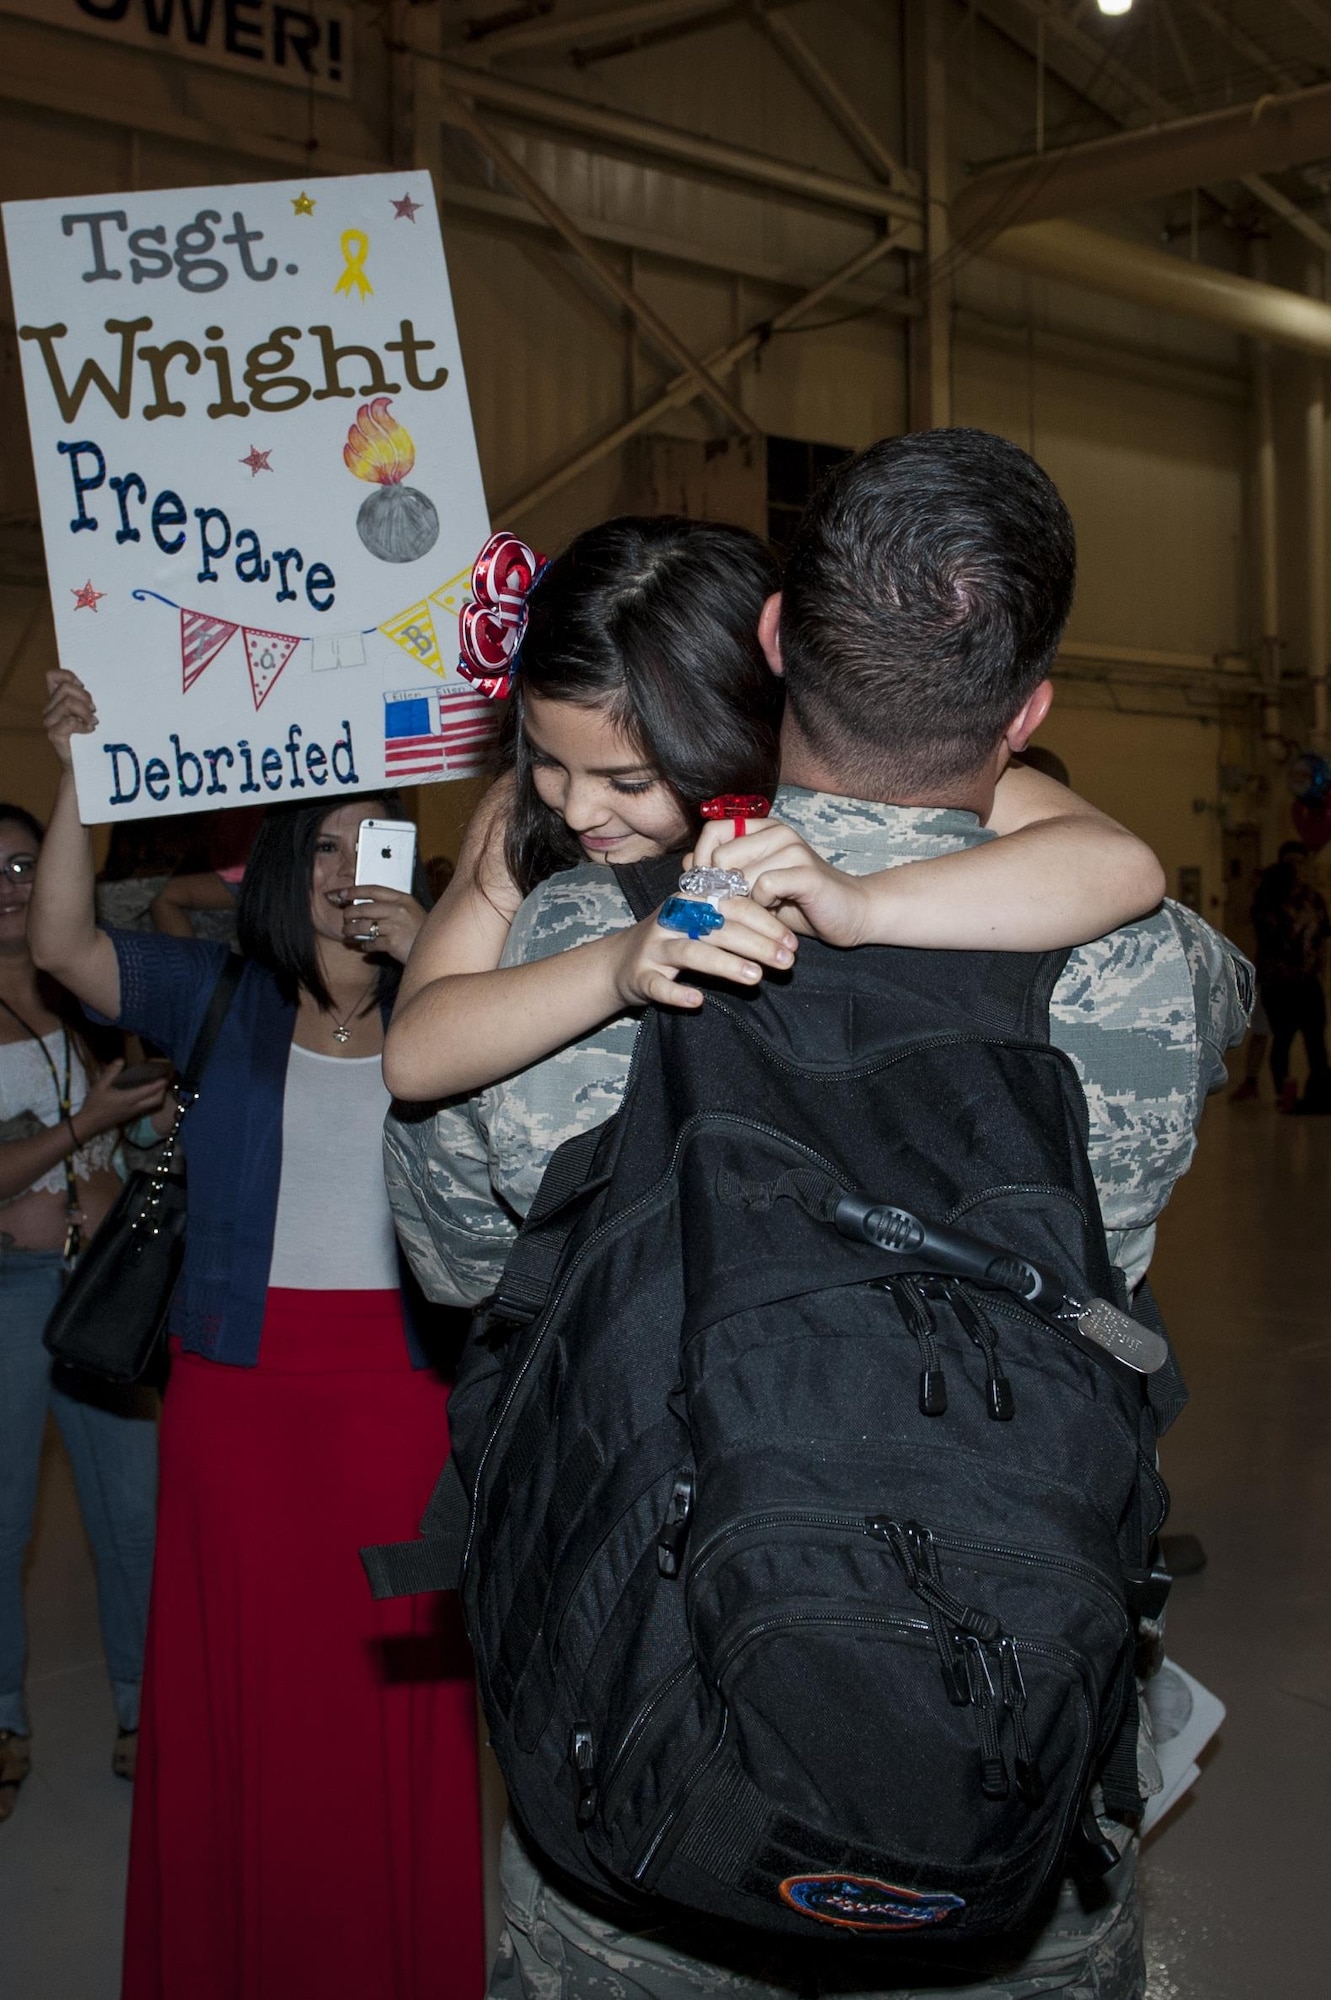 U.S. Air Force Tech. Sgt. Dennis Wright, 74th Expeditionary Fighter Squadron conventional maintenance crew chief, embraces his daughter, Jaci, during a redeployment, March 30, 2016, at Moody Air Force Base, Ga. The 74th EFS deployed to Eastern Europe to train with NATO partners and assure U.S. allies.  (U.S. Air Force photo by Airman 1st Class Lauren M. Hunter/Released)